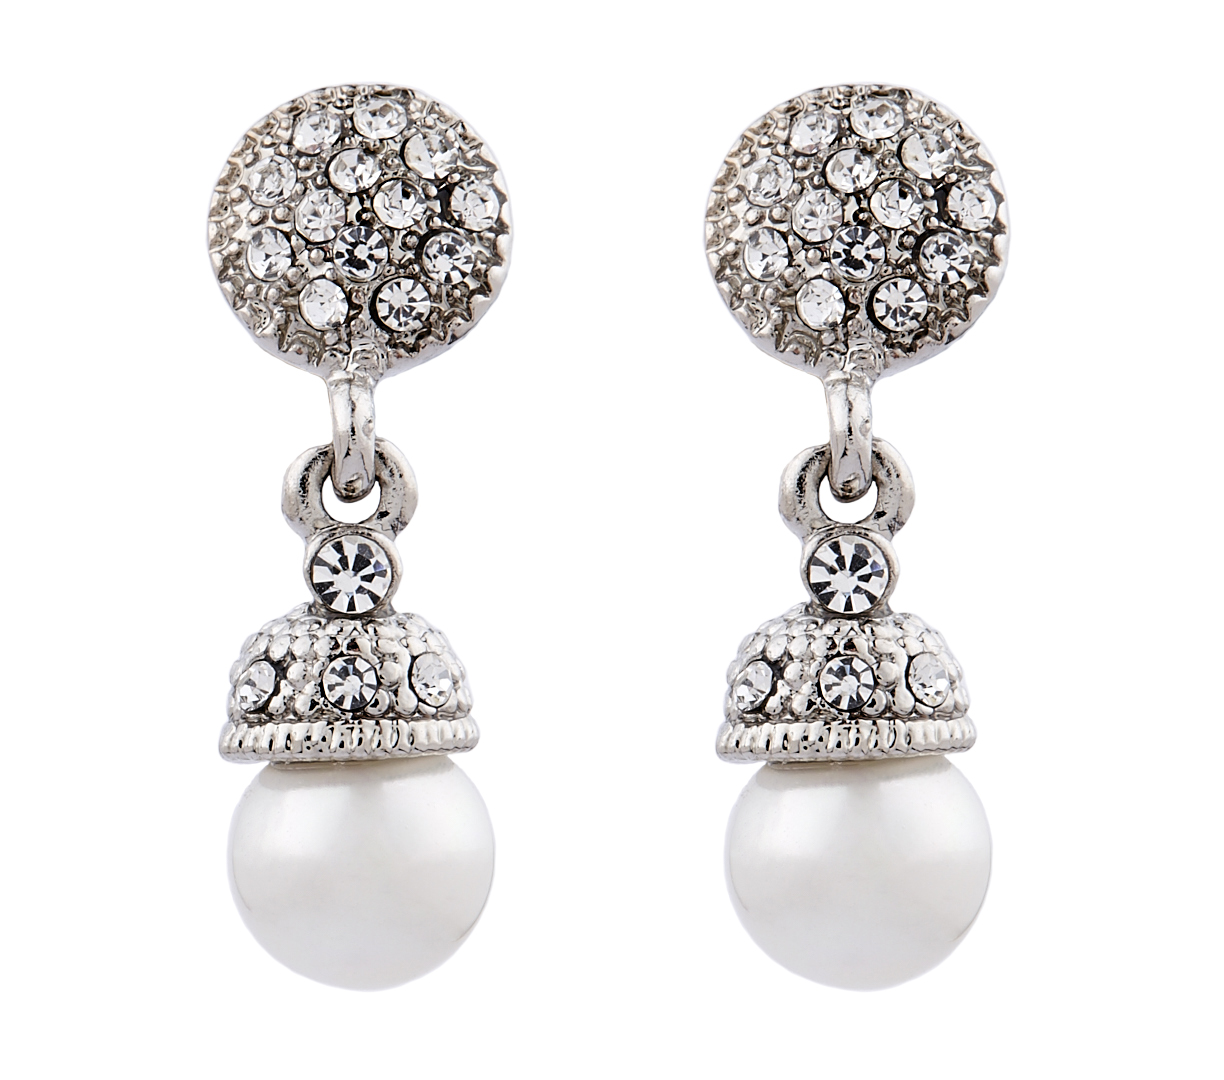 Clip On Earrings - Bell S - silver pearl drop earring with clear crystals